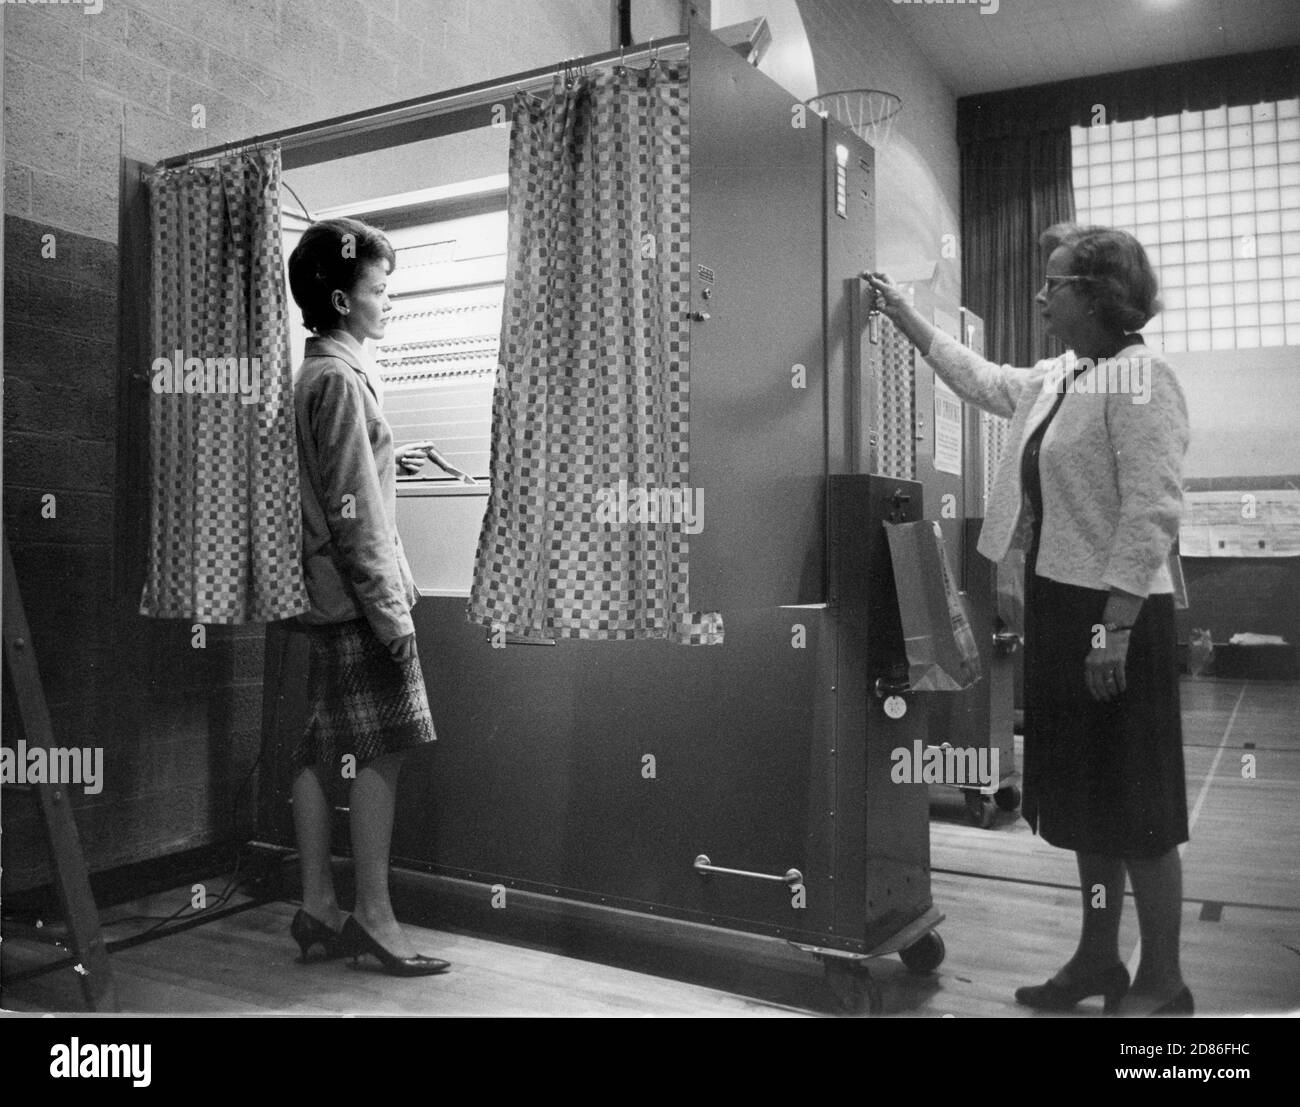 Here a voter prepares to cast her ballot by pulling a lever which closes the privacy curtain and unlocks the machine for voting. A precinct official clears the machine and registers the vote by pressing a button on a side panel, Jamestown, NY, 1965. (Photo by Automatic Voting Machine Co/RBM Vintage Images) Stock Photo